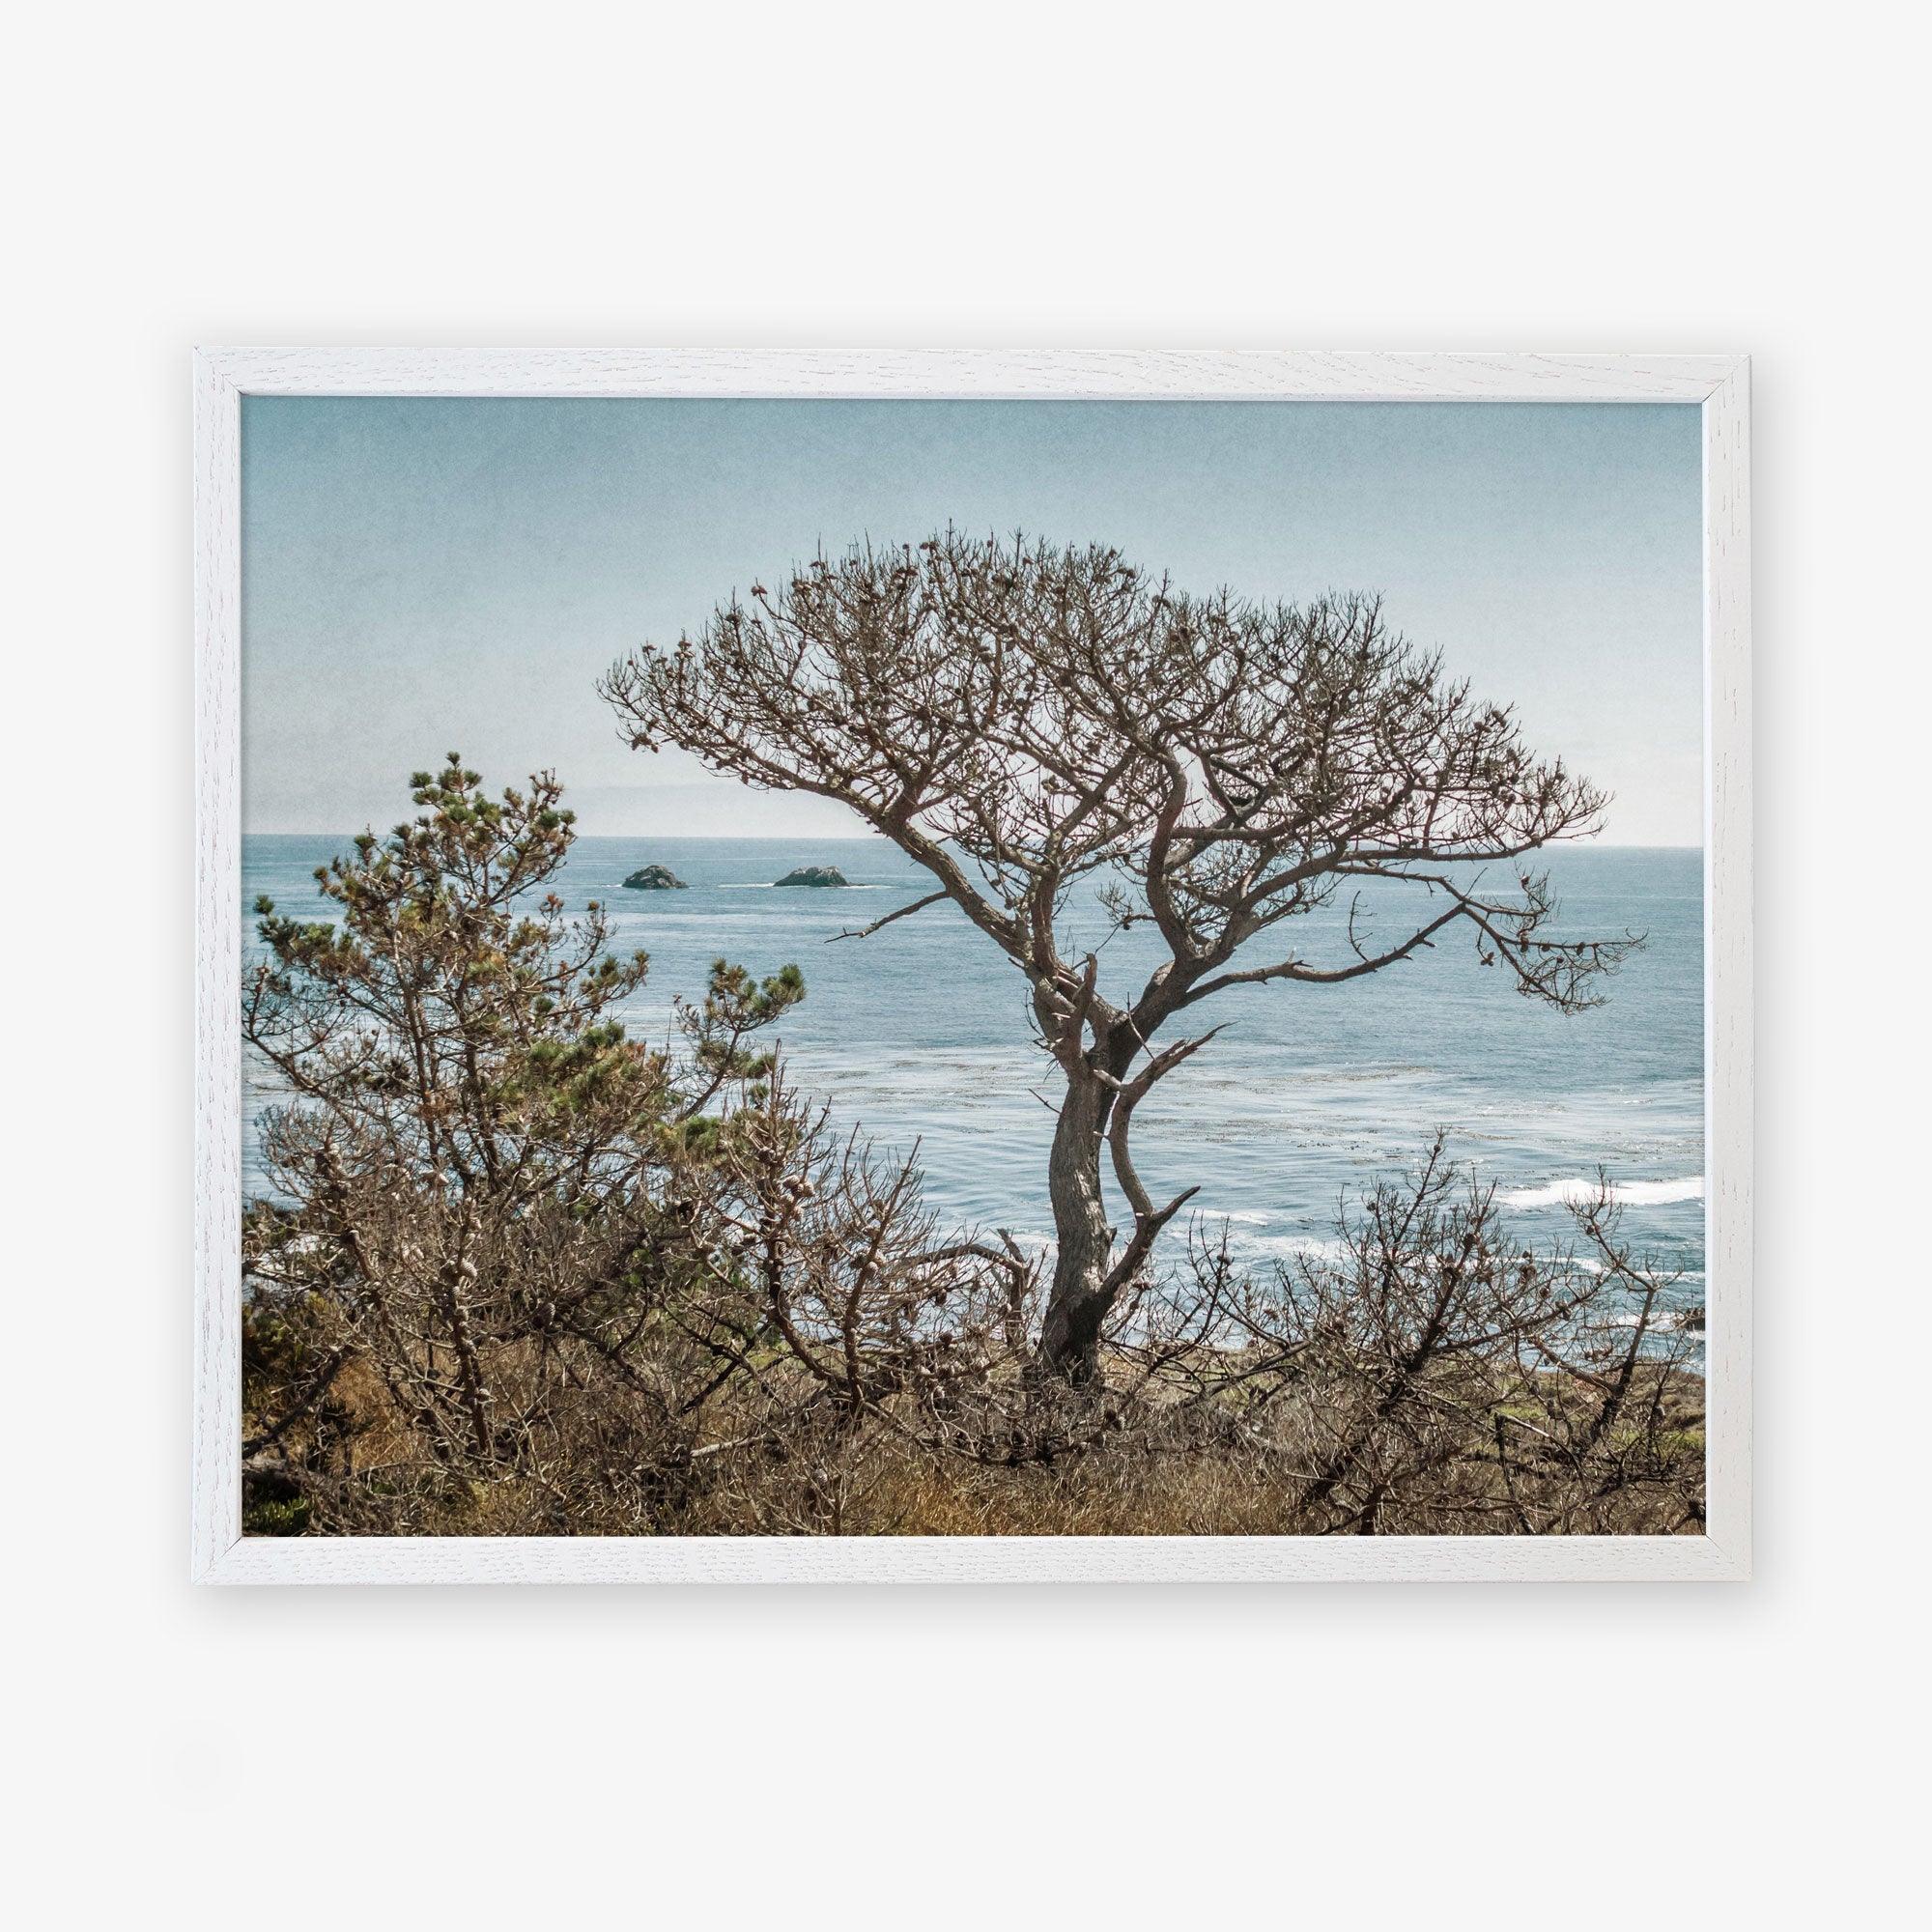 A framed photograph of California Landscape Art in Big Sur, &#39;Wind Blown Tree&#39; by Offley Green, overlooking the ocean with distant rocks protruding from the water, captured on archival photographic paper.